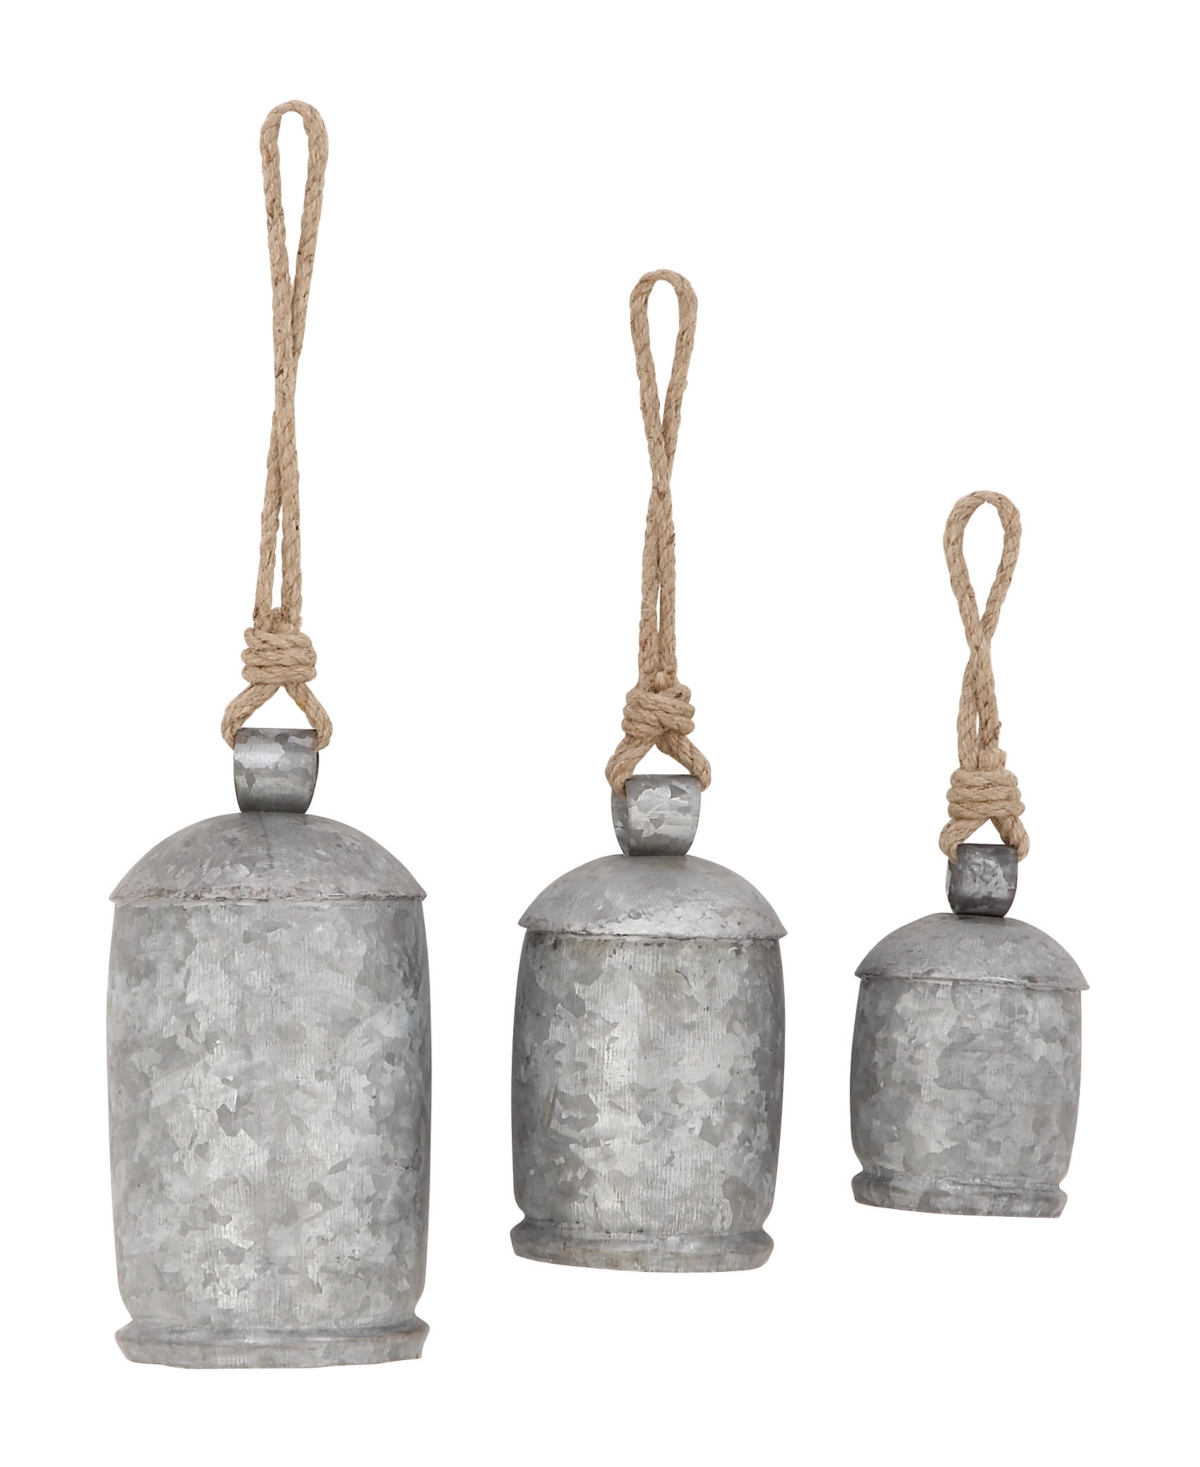 Rosemary Lane Bronze Metal Rustic Decorative Cow Bell With Jute Hanging Rope Set 3 Pieces In Gray